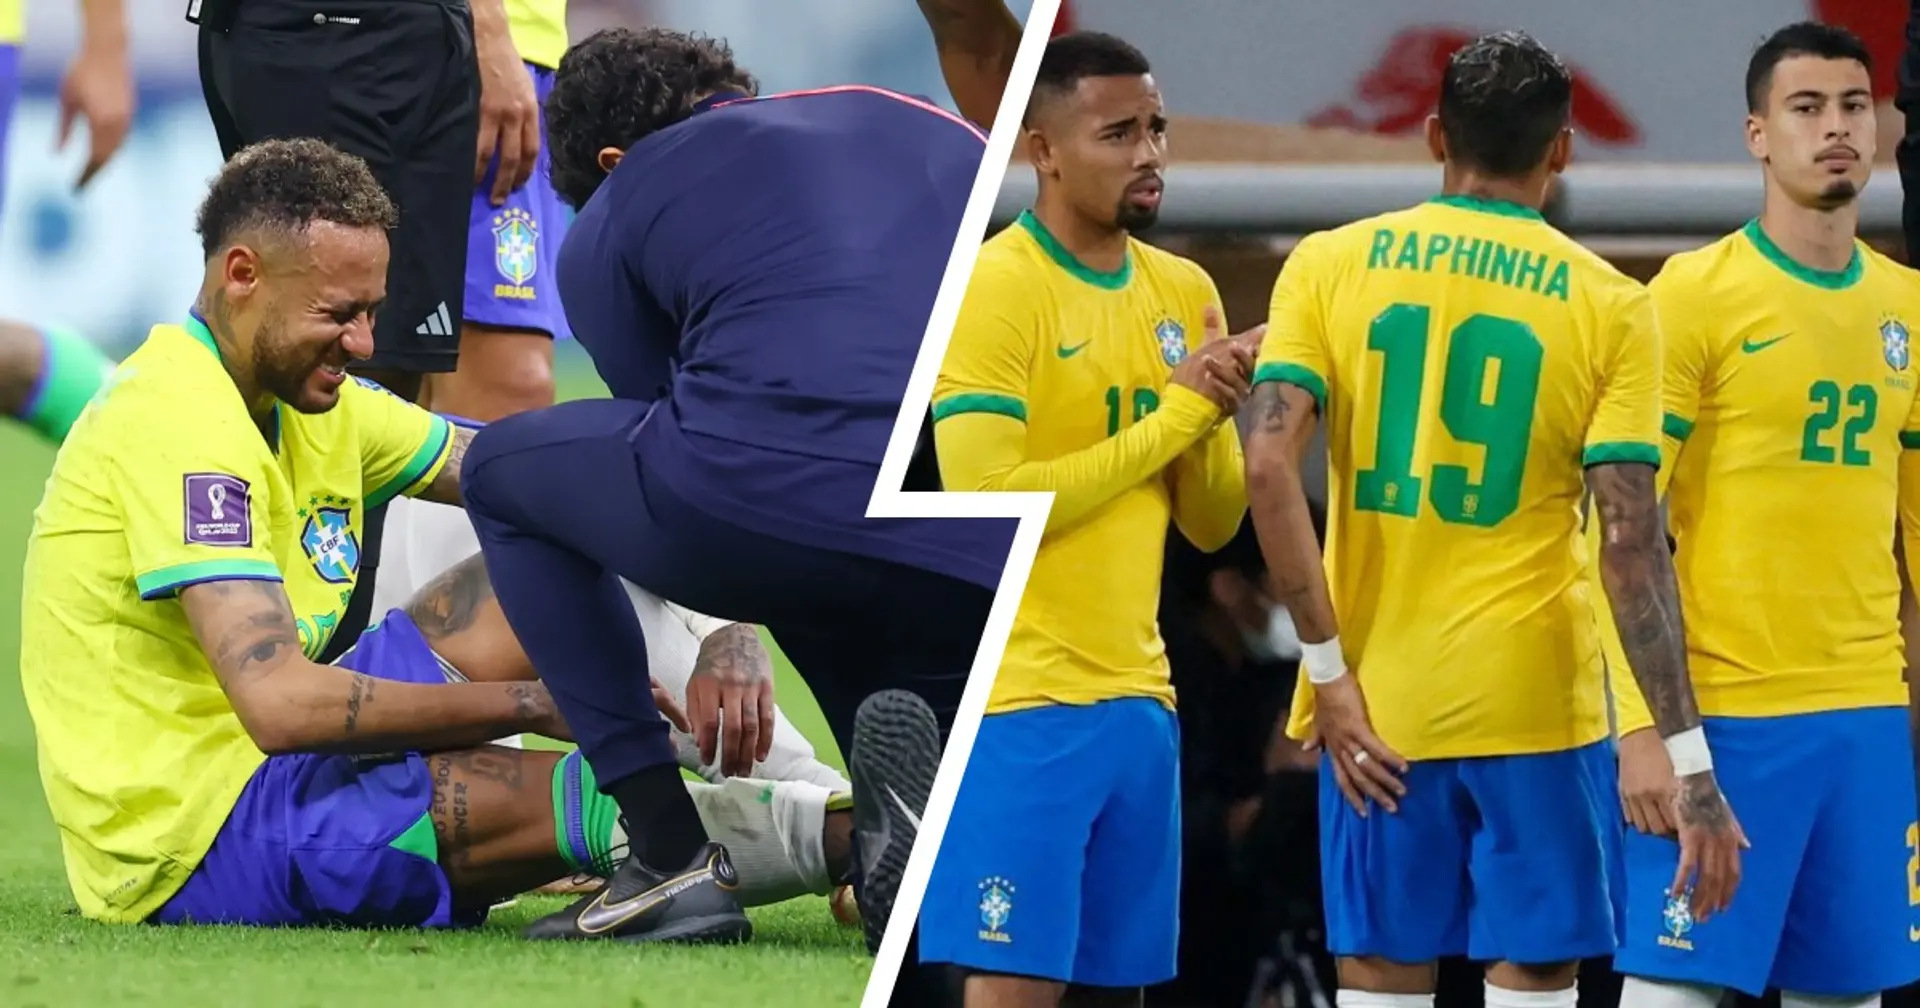 Neymar's injury creates opportunity for Jesus and Martinelli: Which Gabriel should start? 